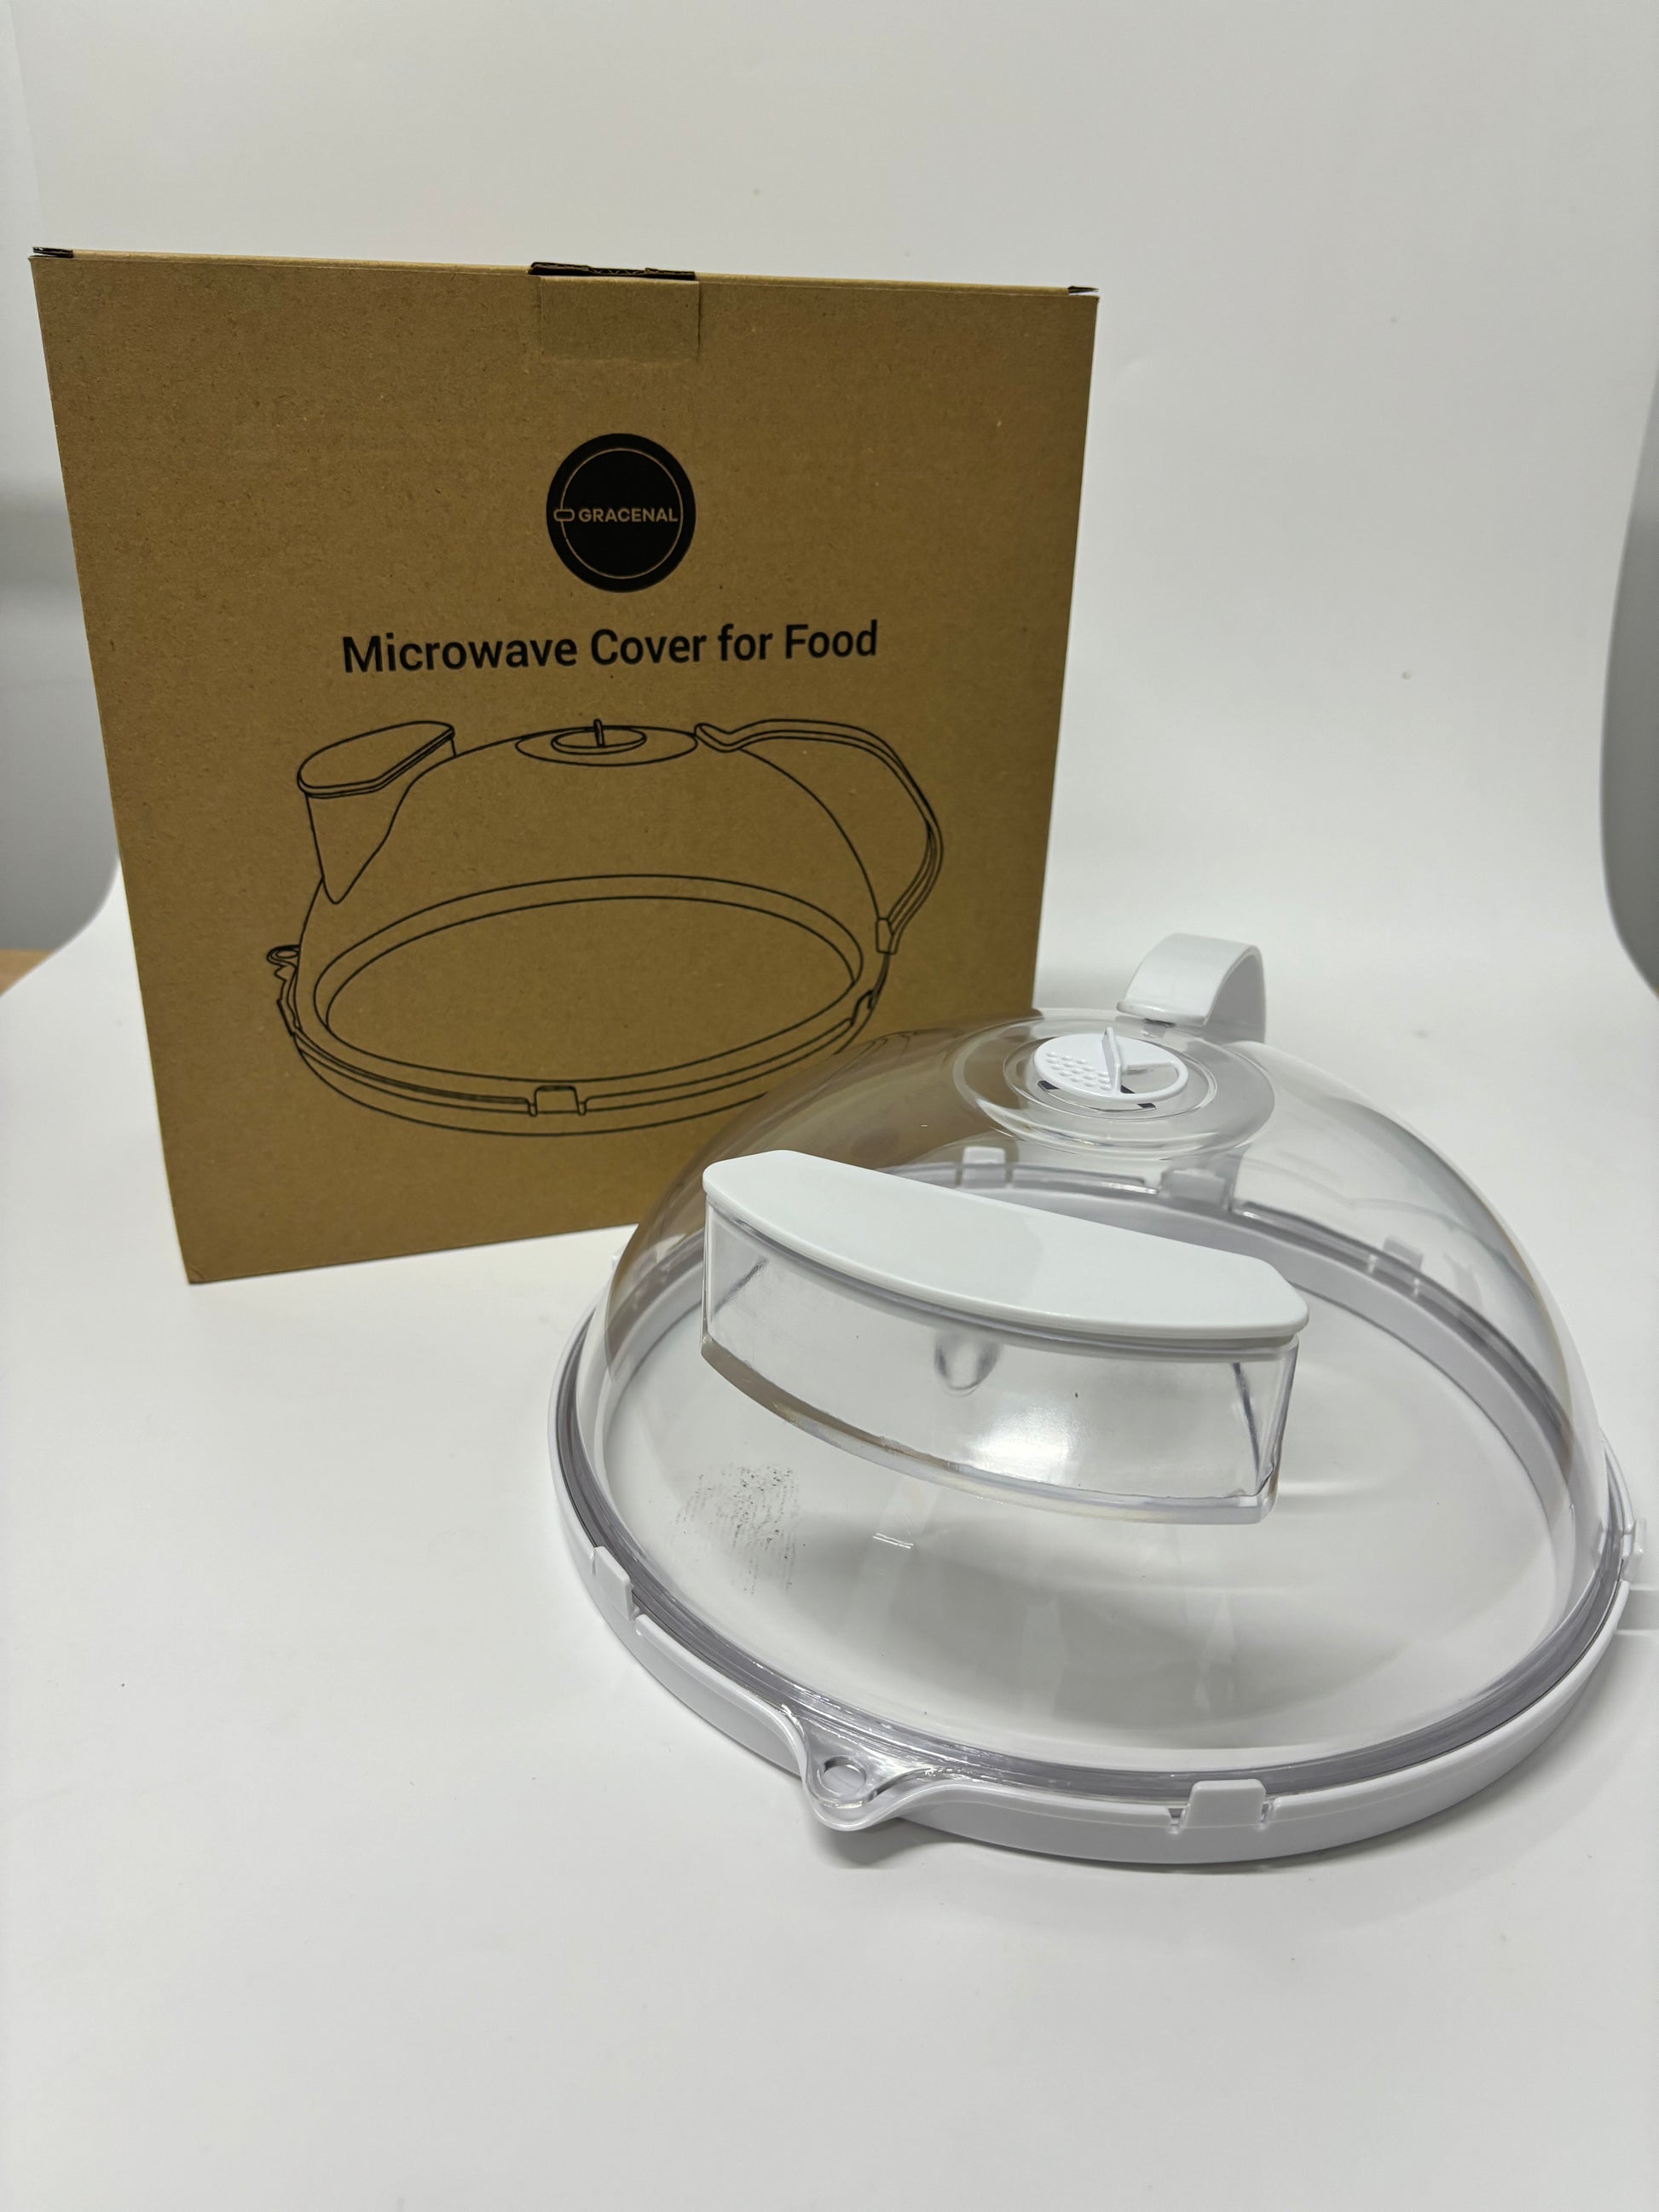  Gracenal Microwave Cover for Food, Clear Microwave